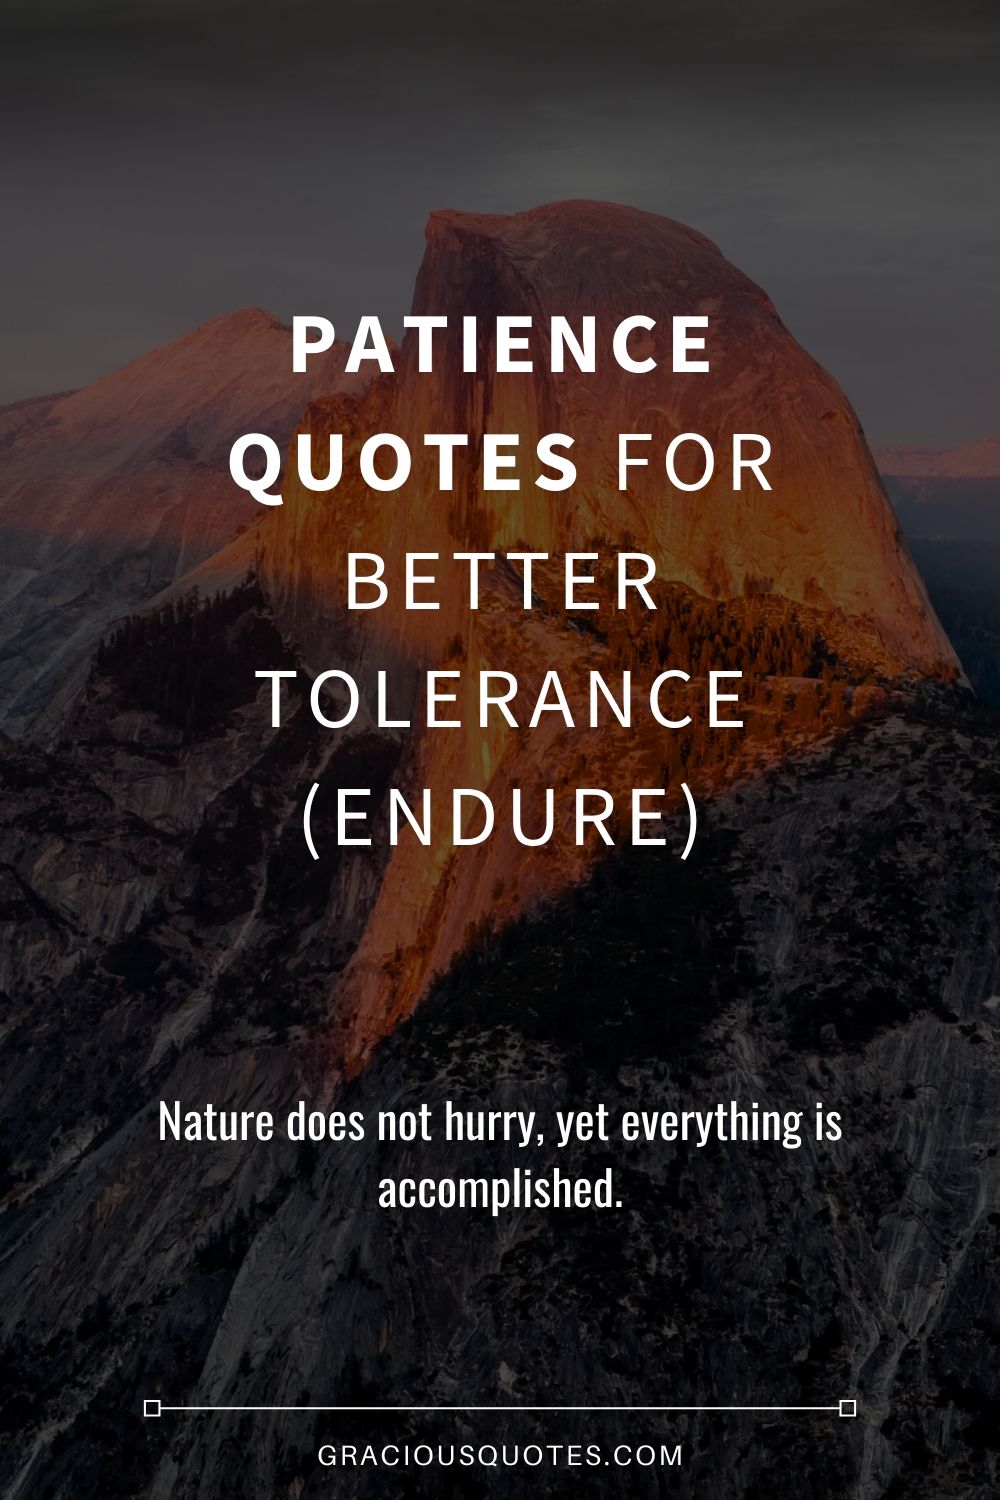 Patience Quotes for Better Tolerance (ENDURE) - Gracious Quotes (EDITED)